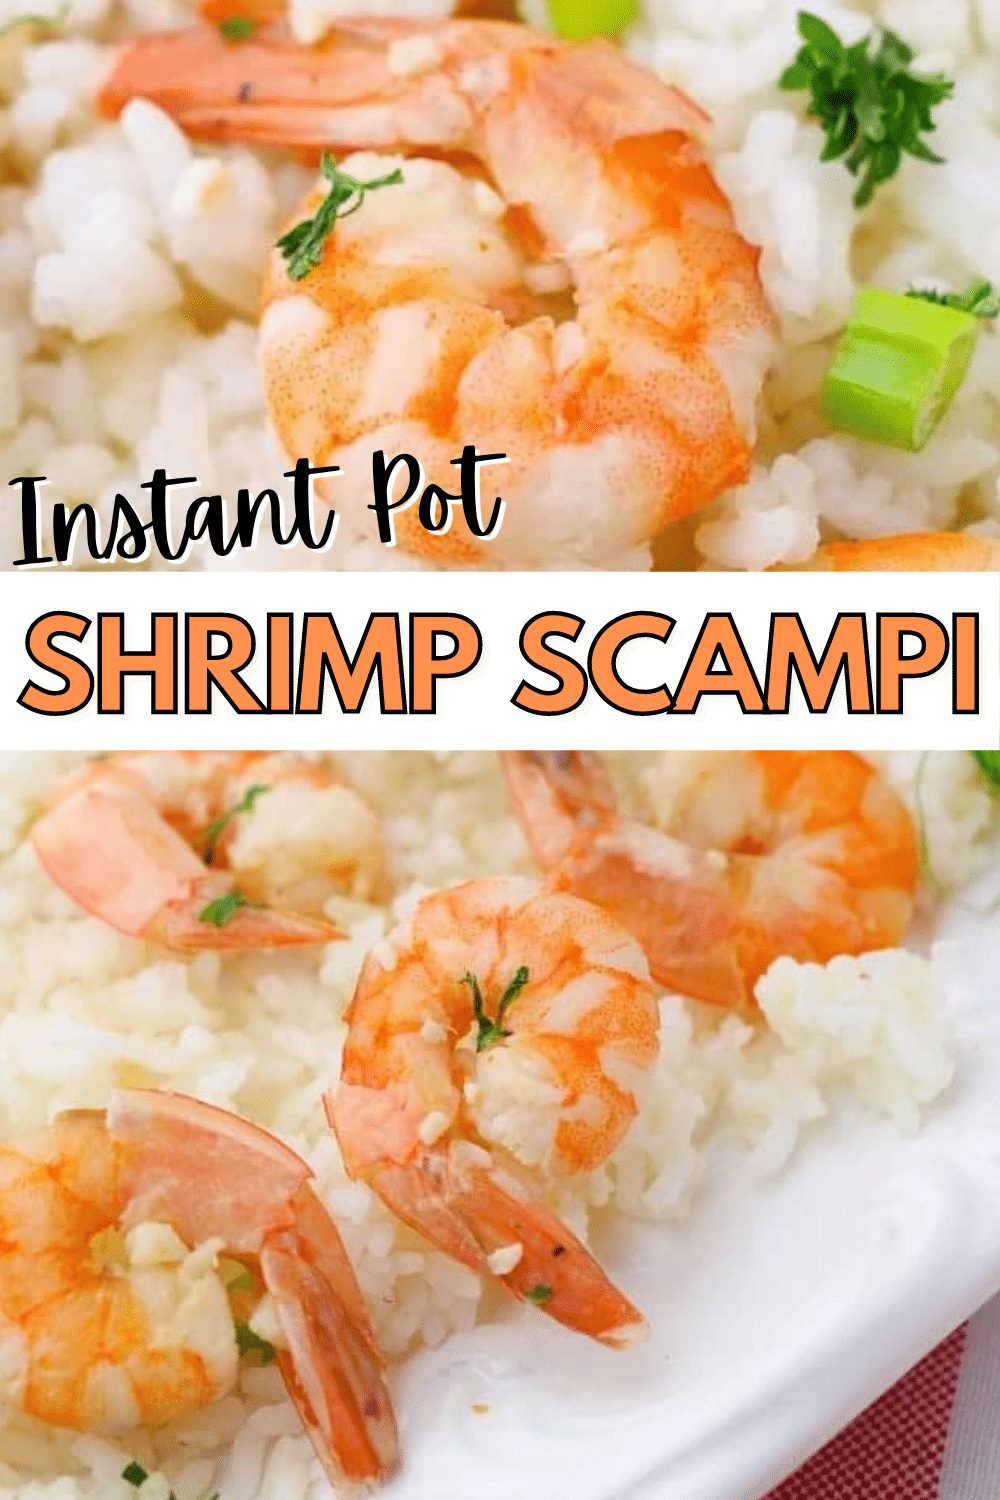 This Instant Pot Shrimp Scampi is quick and easy and perfect served over rice or pasta. So much lemony garlic flavor, so little work! #instantpot #pressurecooker #shrimpscampi #shrimp via @wondermomwannab